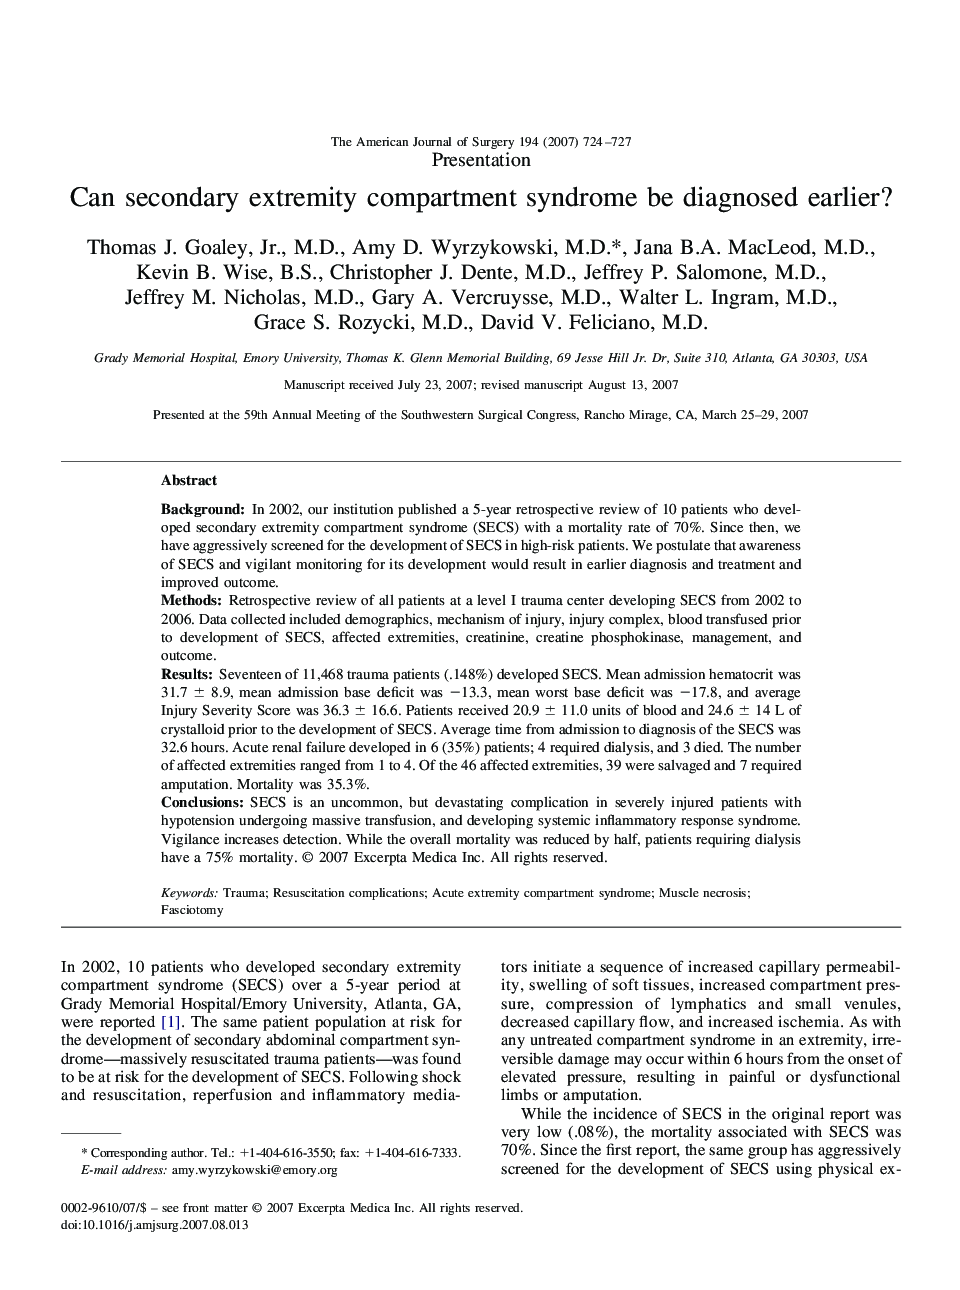 Can secondary extremity compartment syndrome be diagnosed earlier?